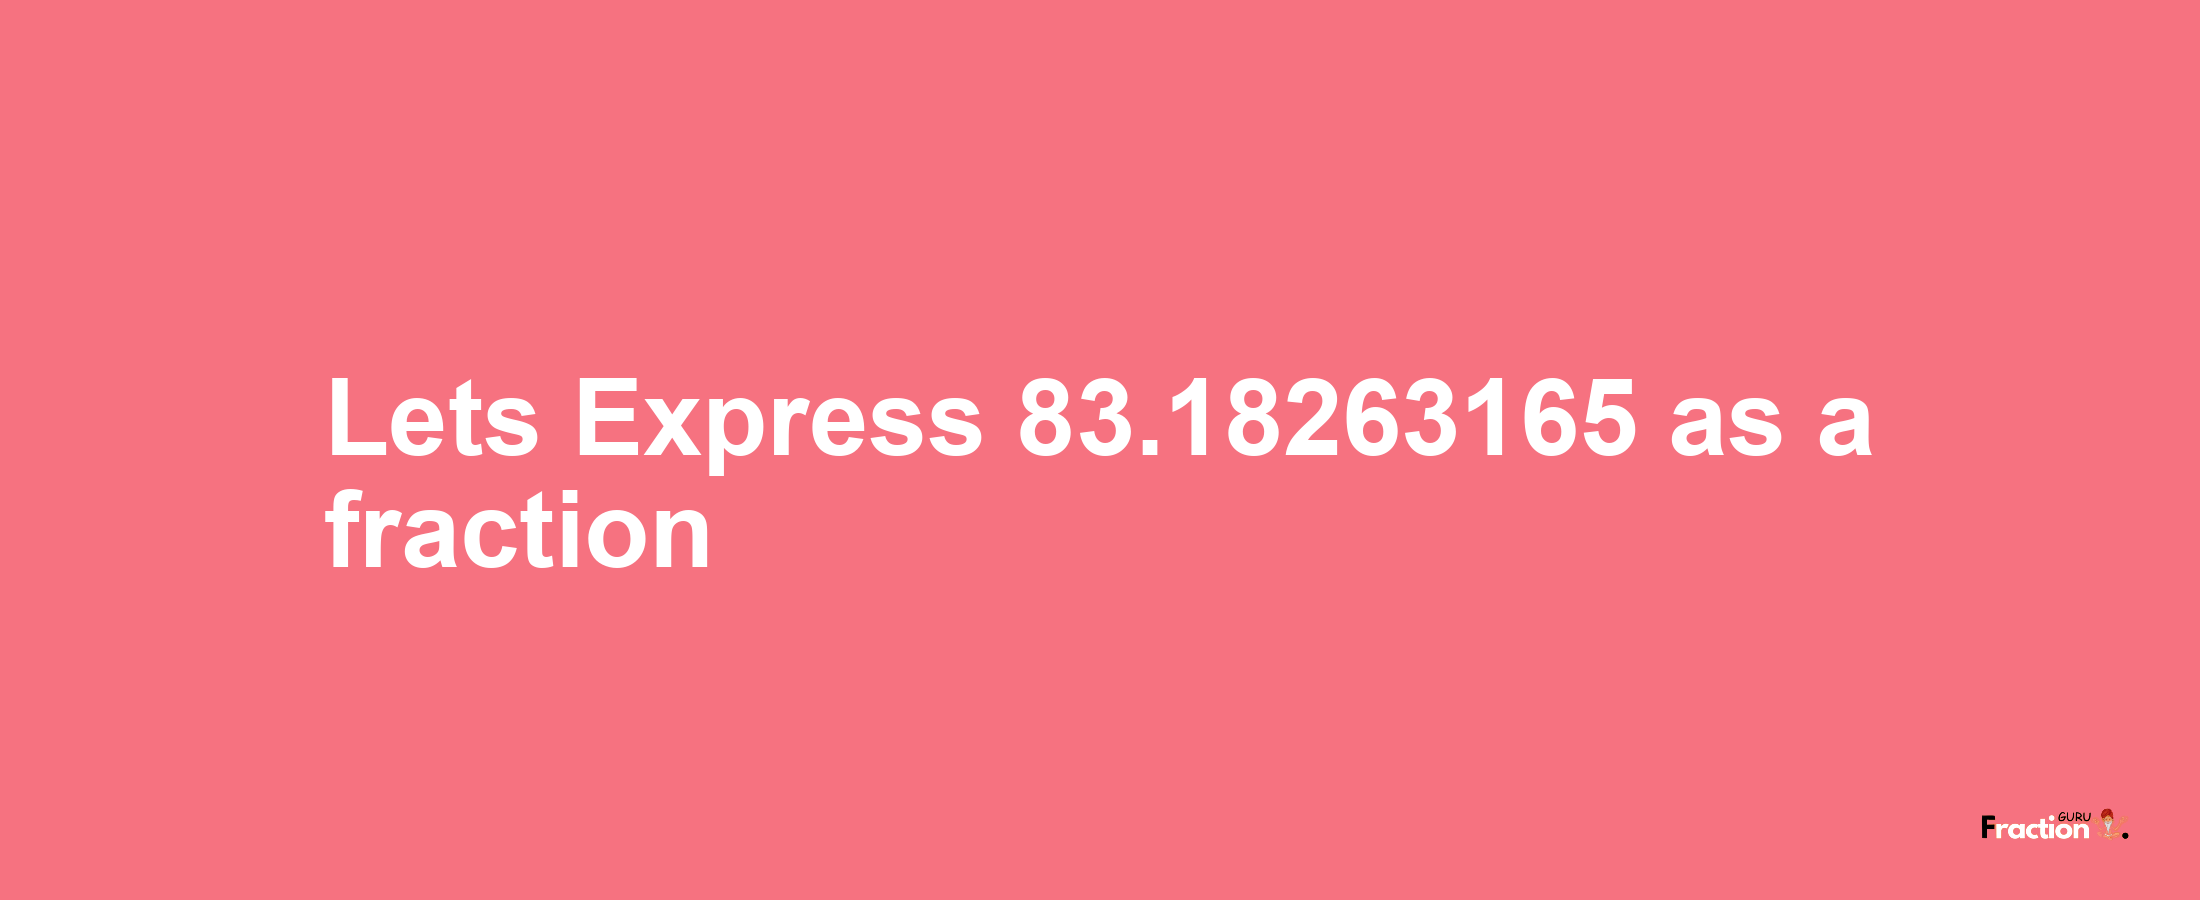 Lets Express 83.18263165 as afraction